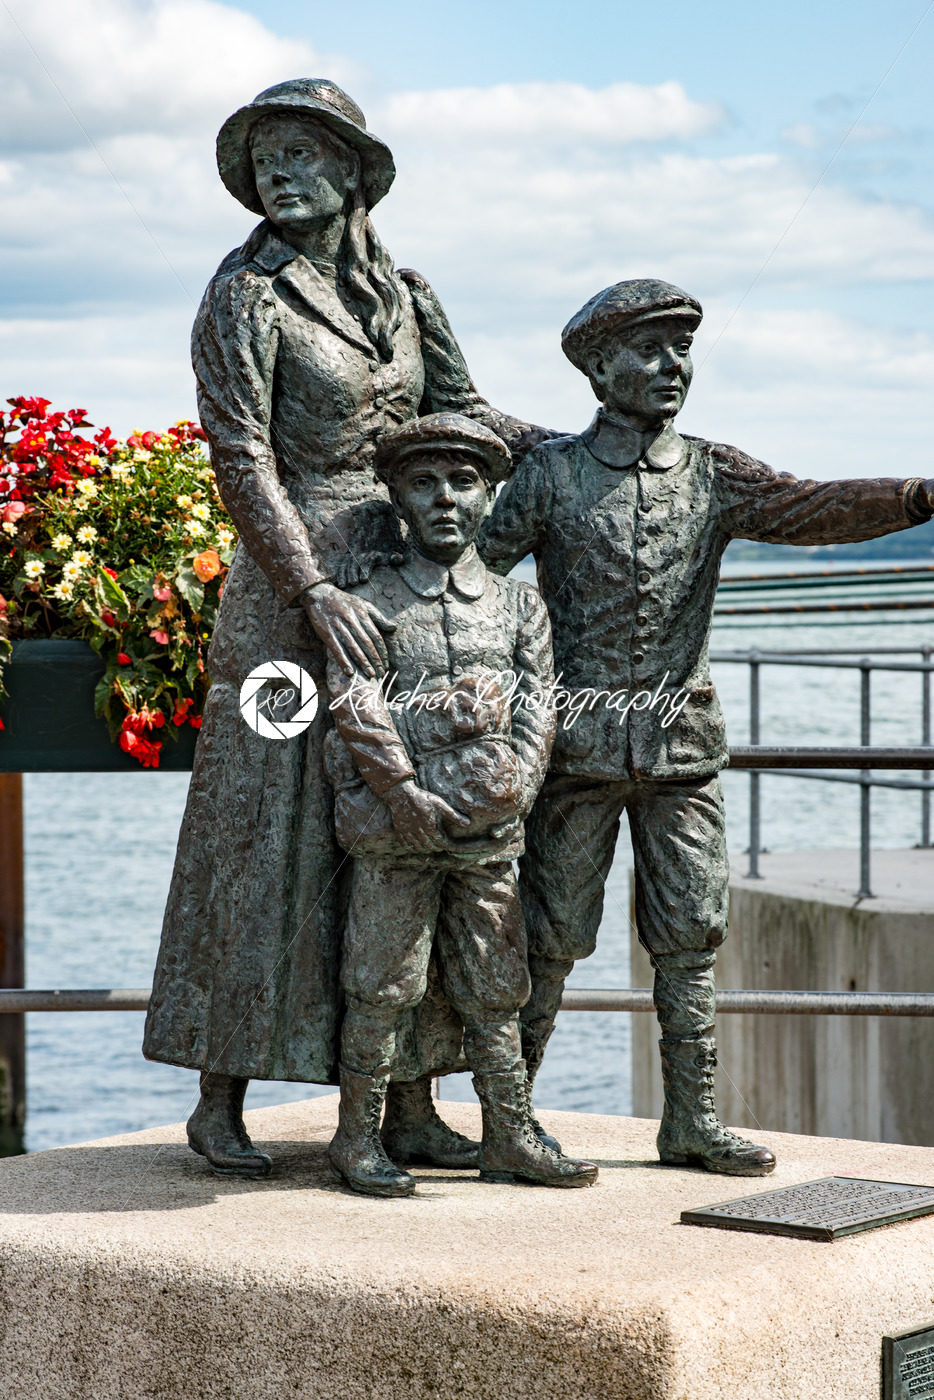 The Annie Moore Memorial, statue of Annie Moore and her two Brothers in Cobh, Ireland - Kelleher Photography Store